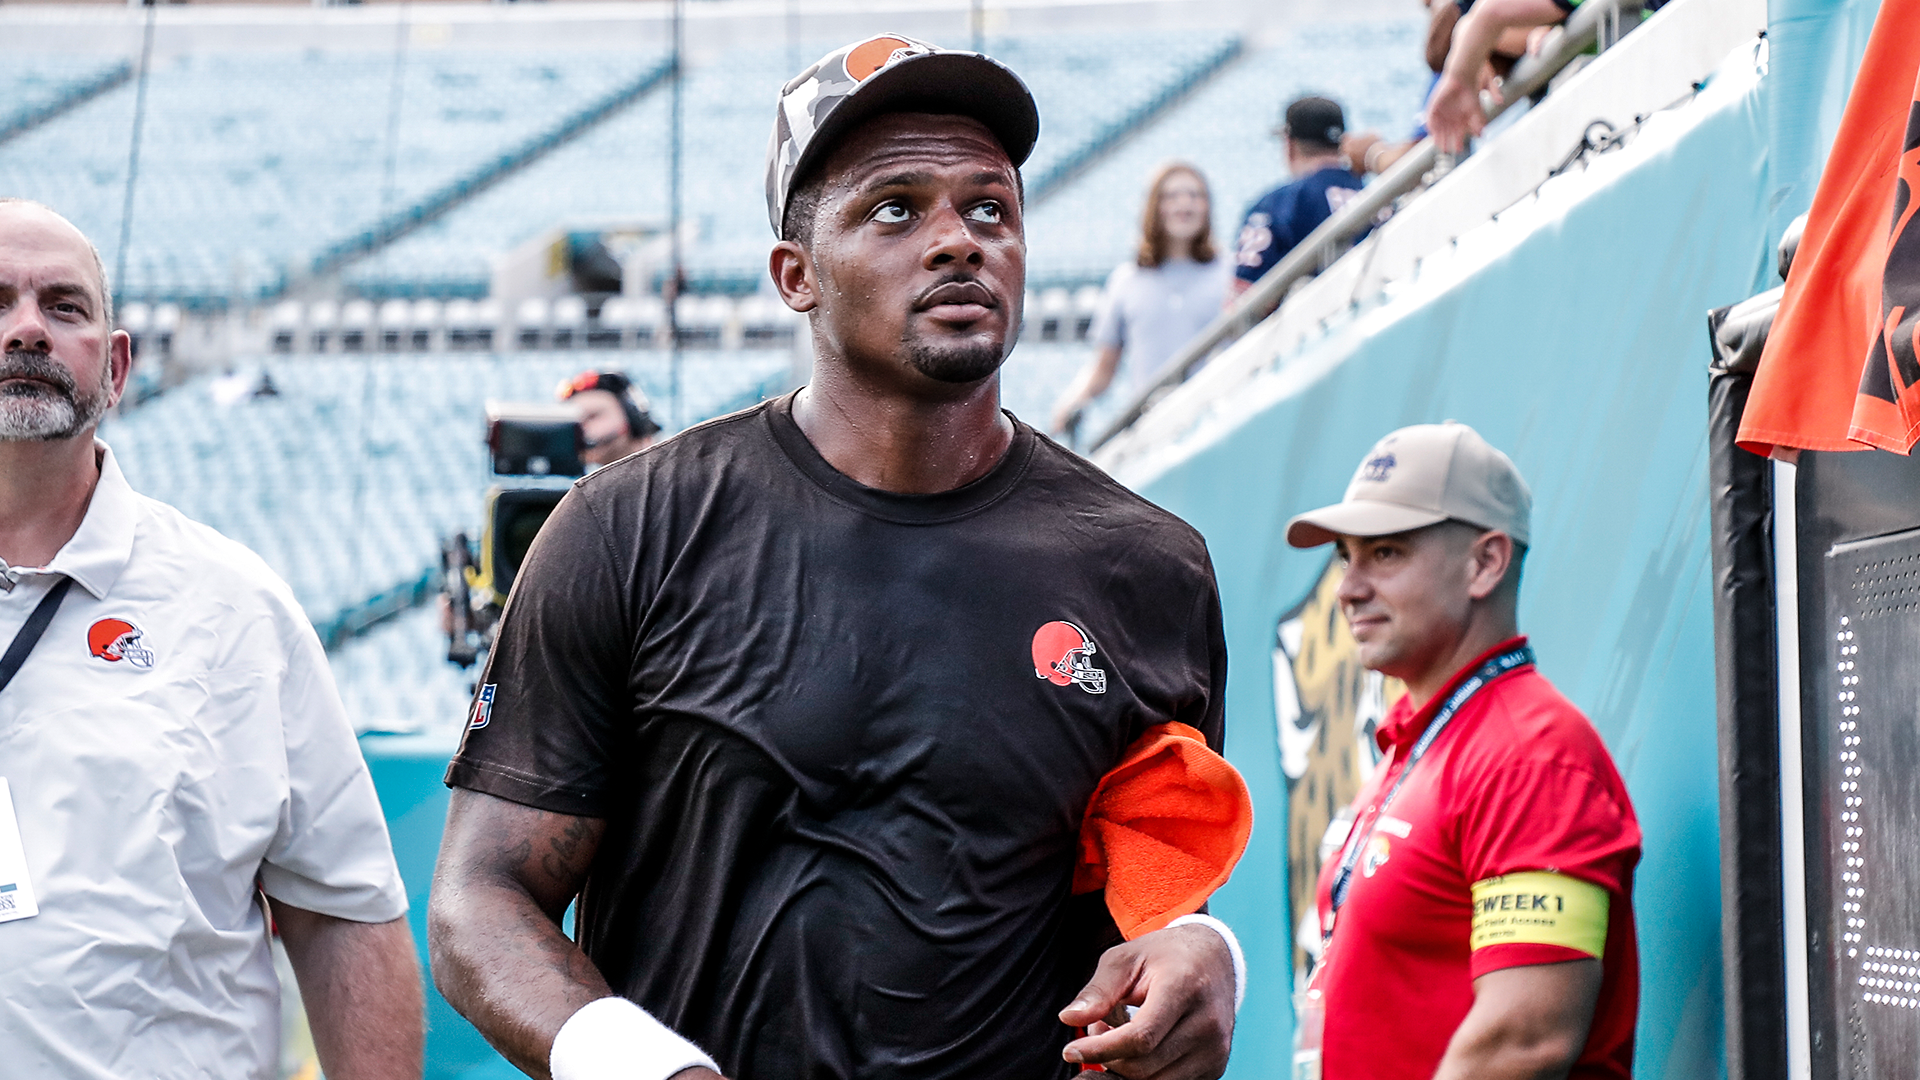 Browns’ Deshaun Watson apologizes ‘to all the women I have impacted’